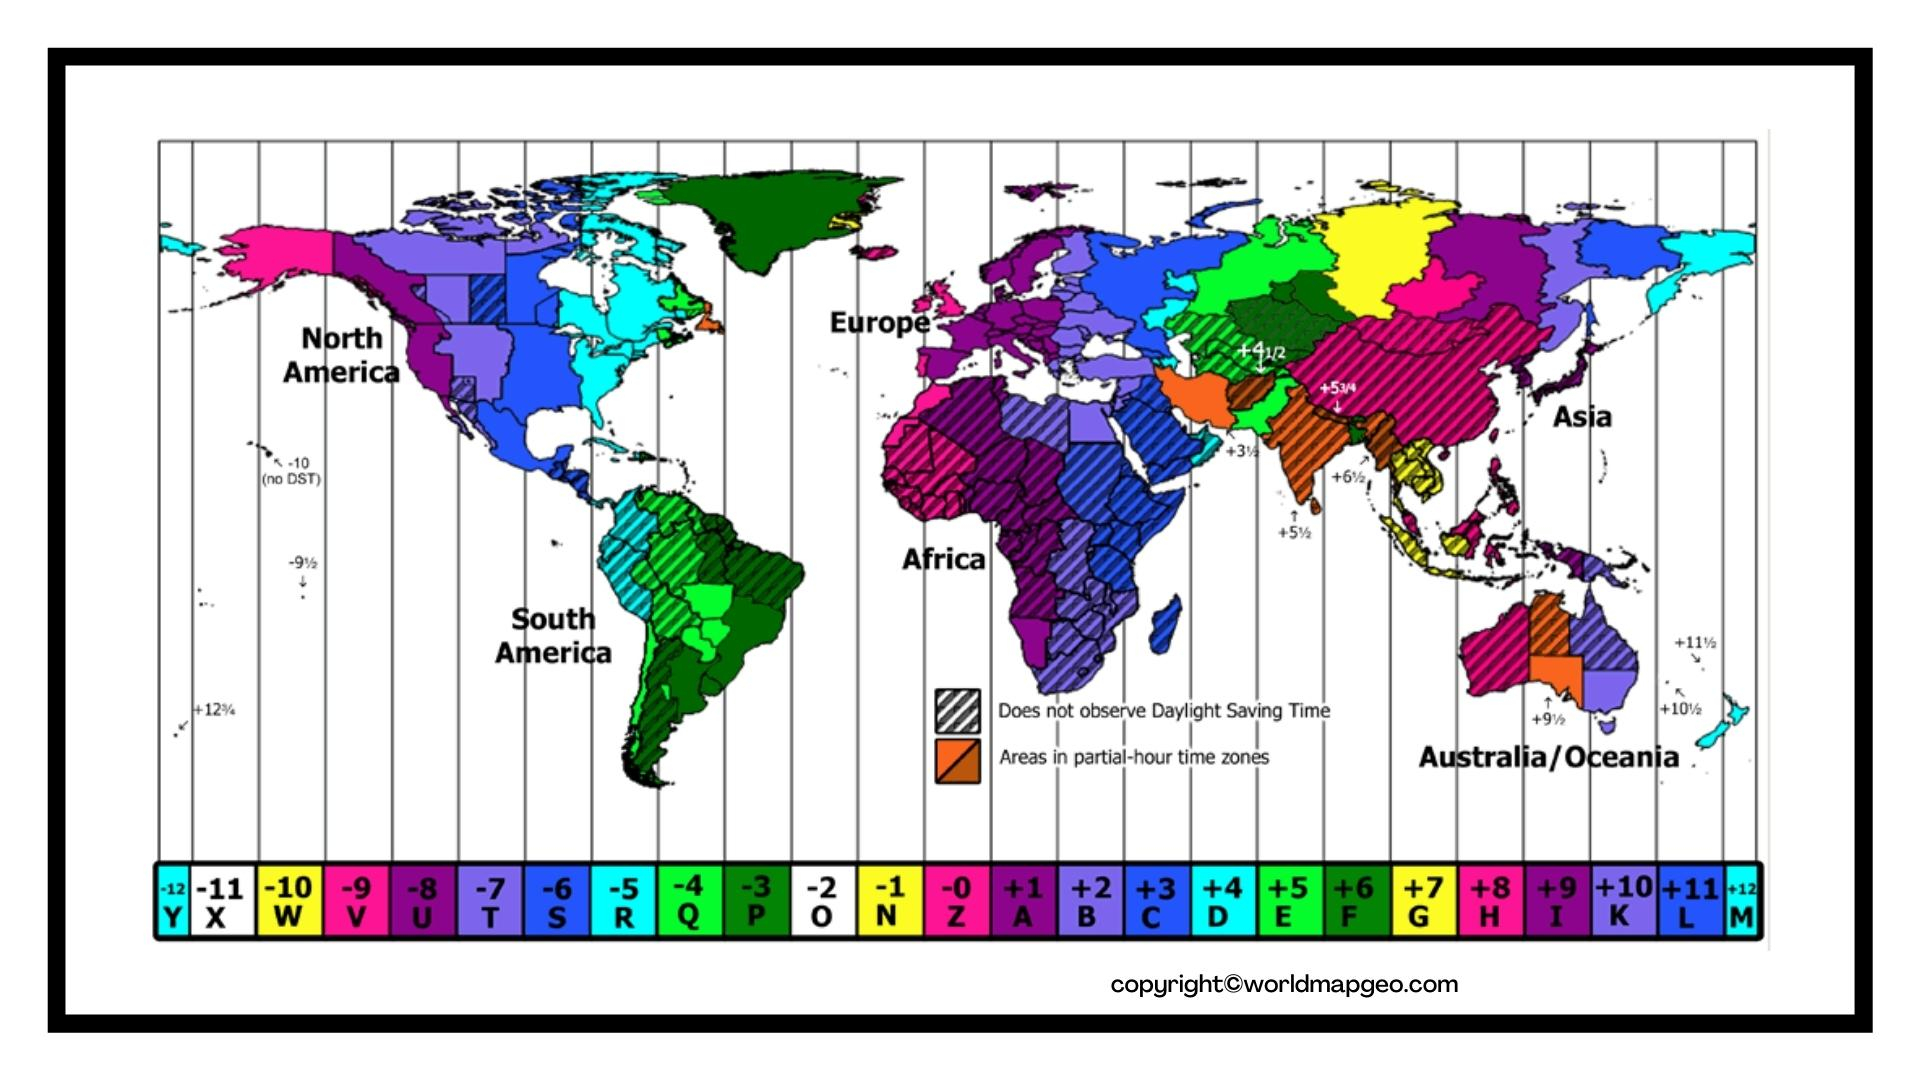 1920x1080 World Time Zone Map Printable in High Resolution with Names